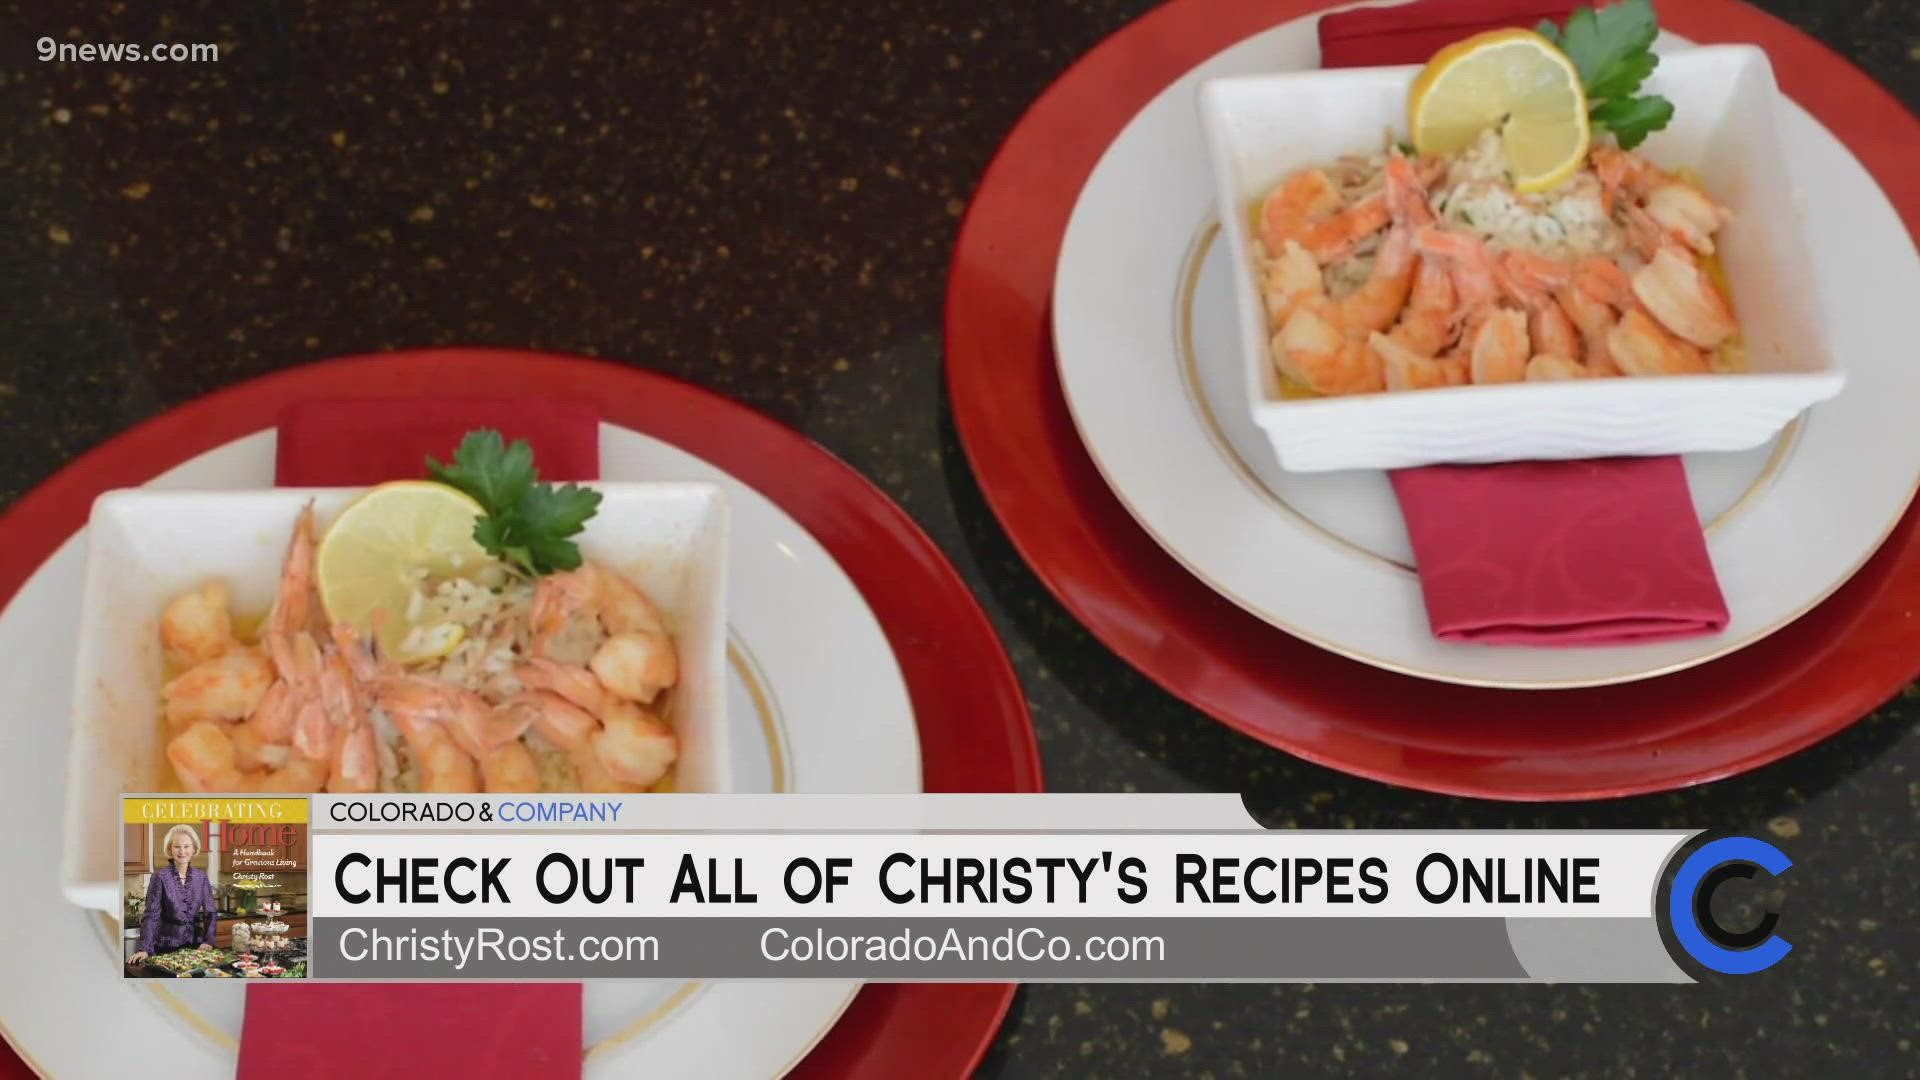 Find this recipe and more at ColoradoAndCo.com and learn more about Christy at ChristyRost.com.